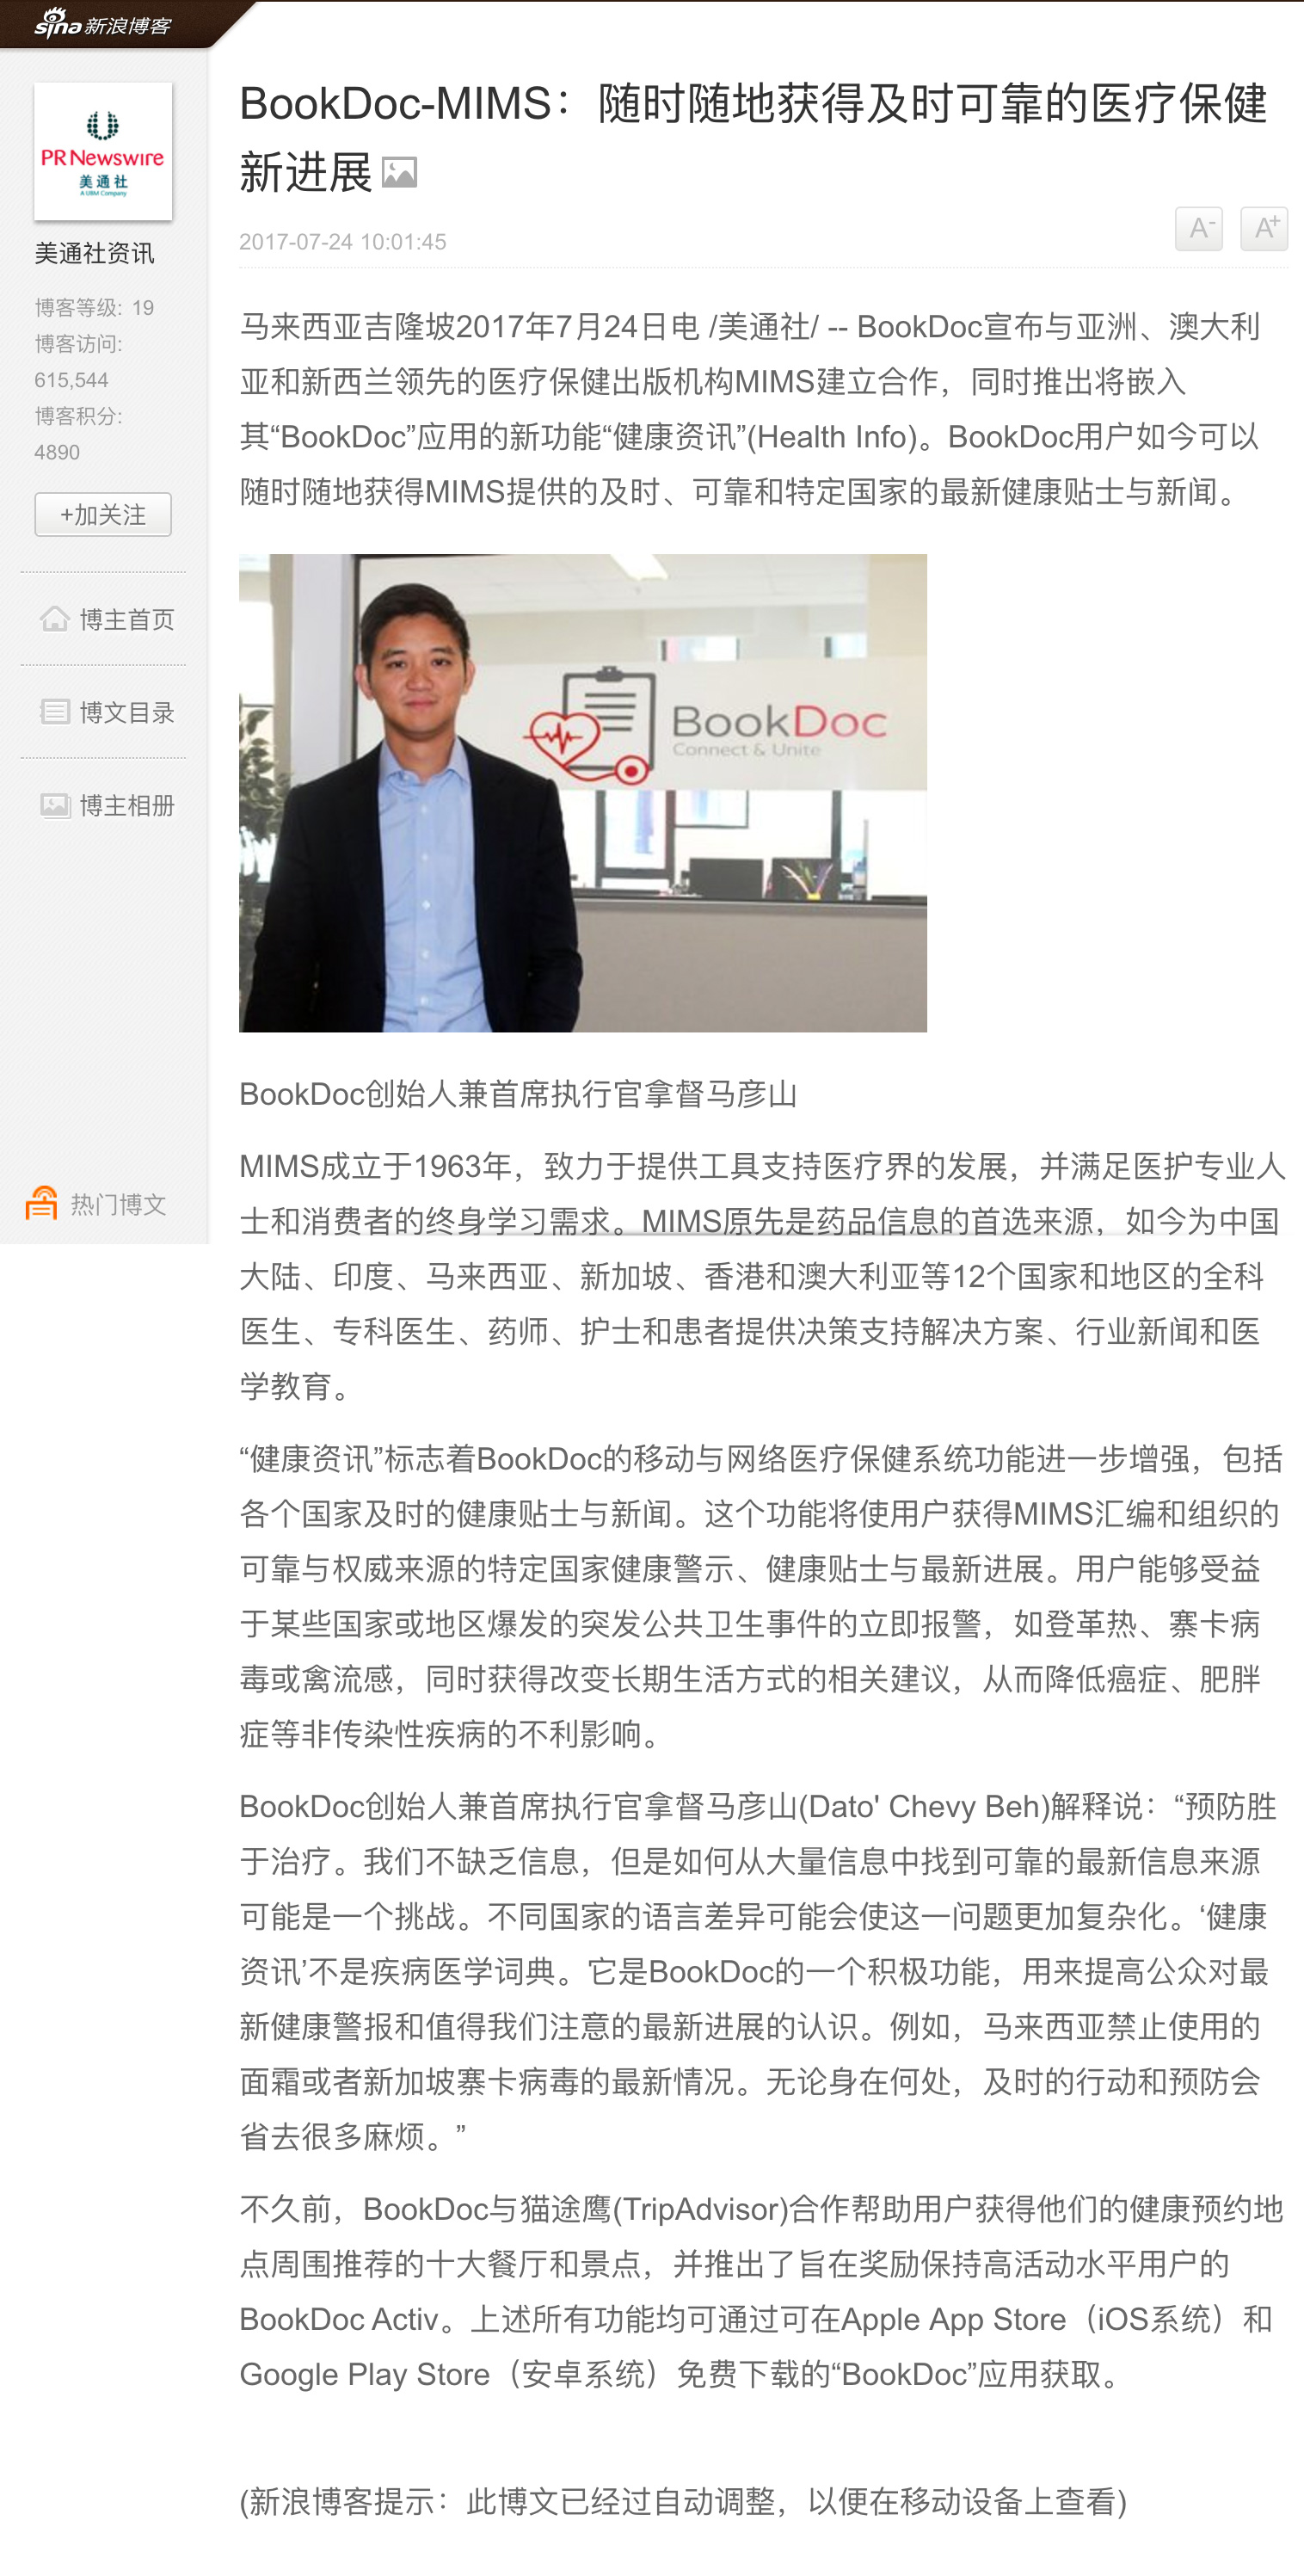 BookDoc featured in Sina Of China